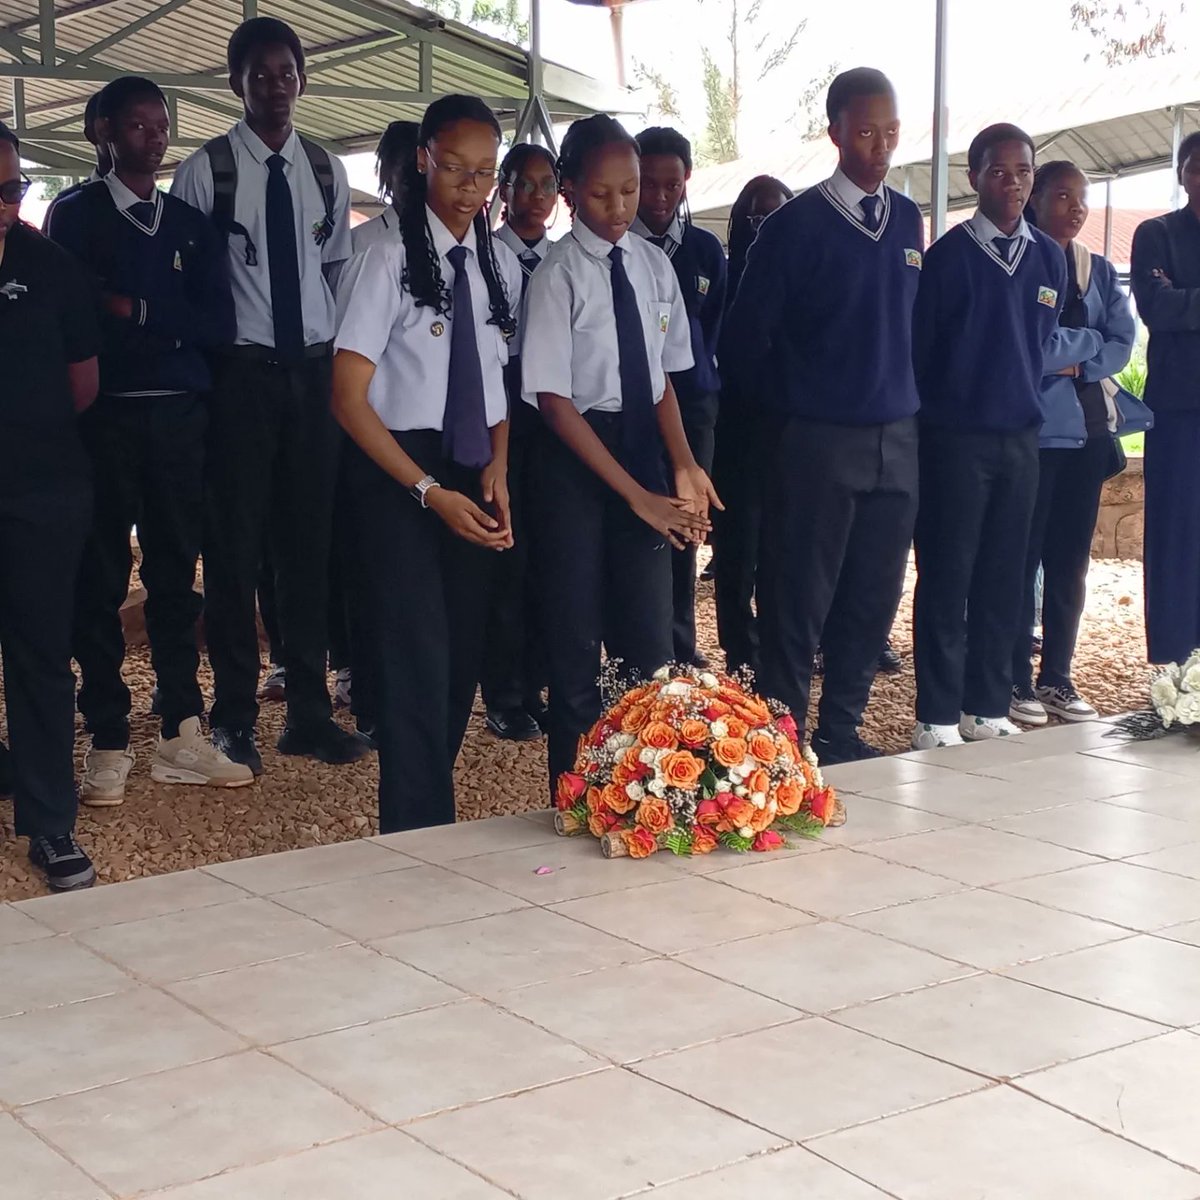 Students and staff from @PathtoSuccess1 school visited @NyanzaMemorial to learn about Genocide Perpetrated against Tutsi in 1994.